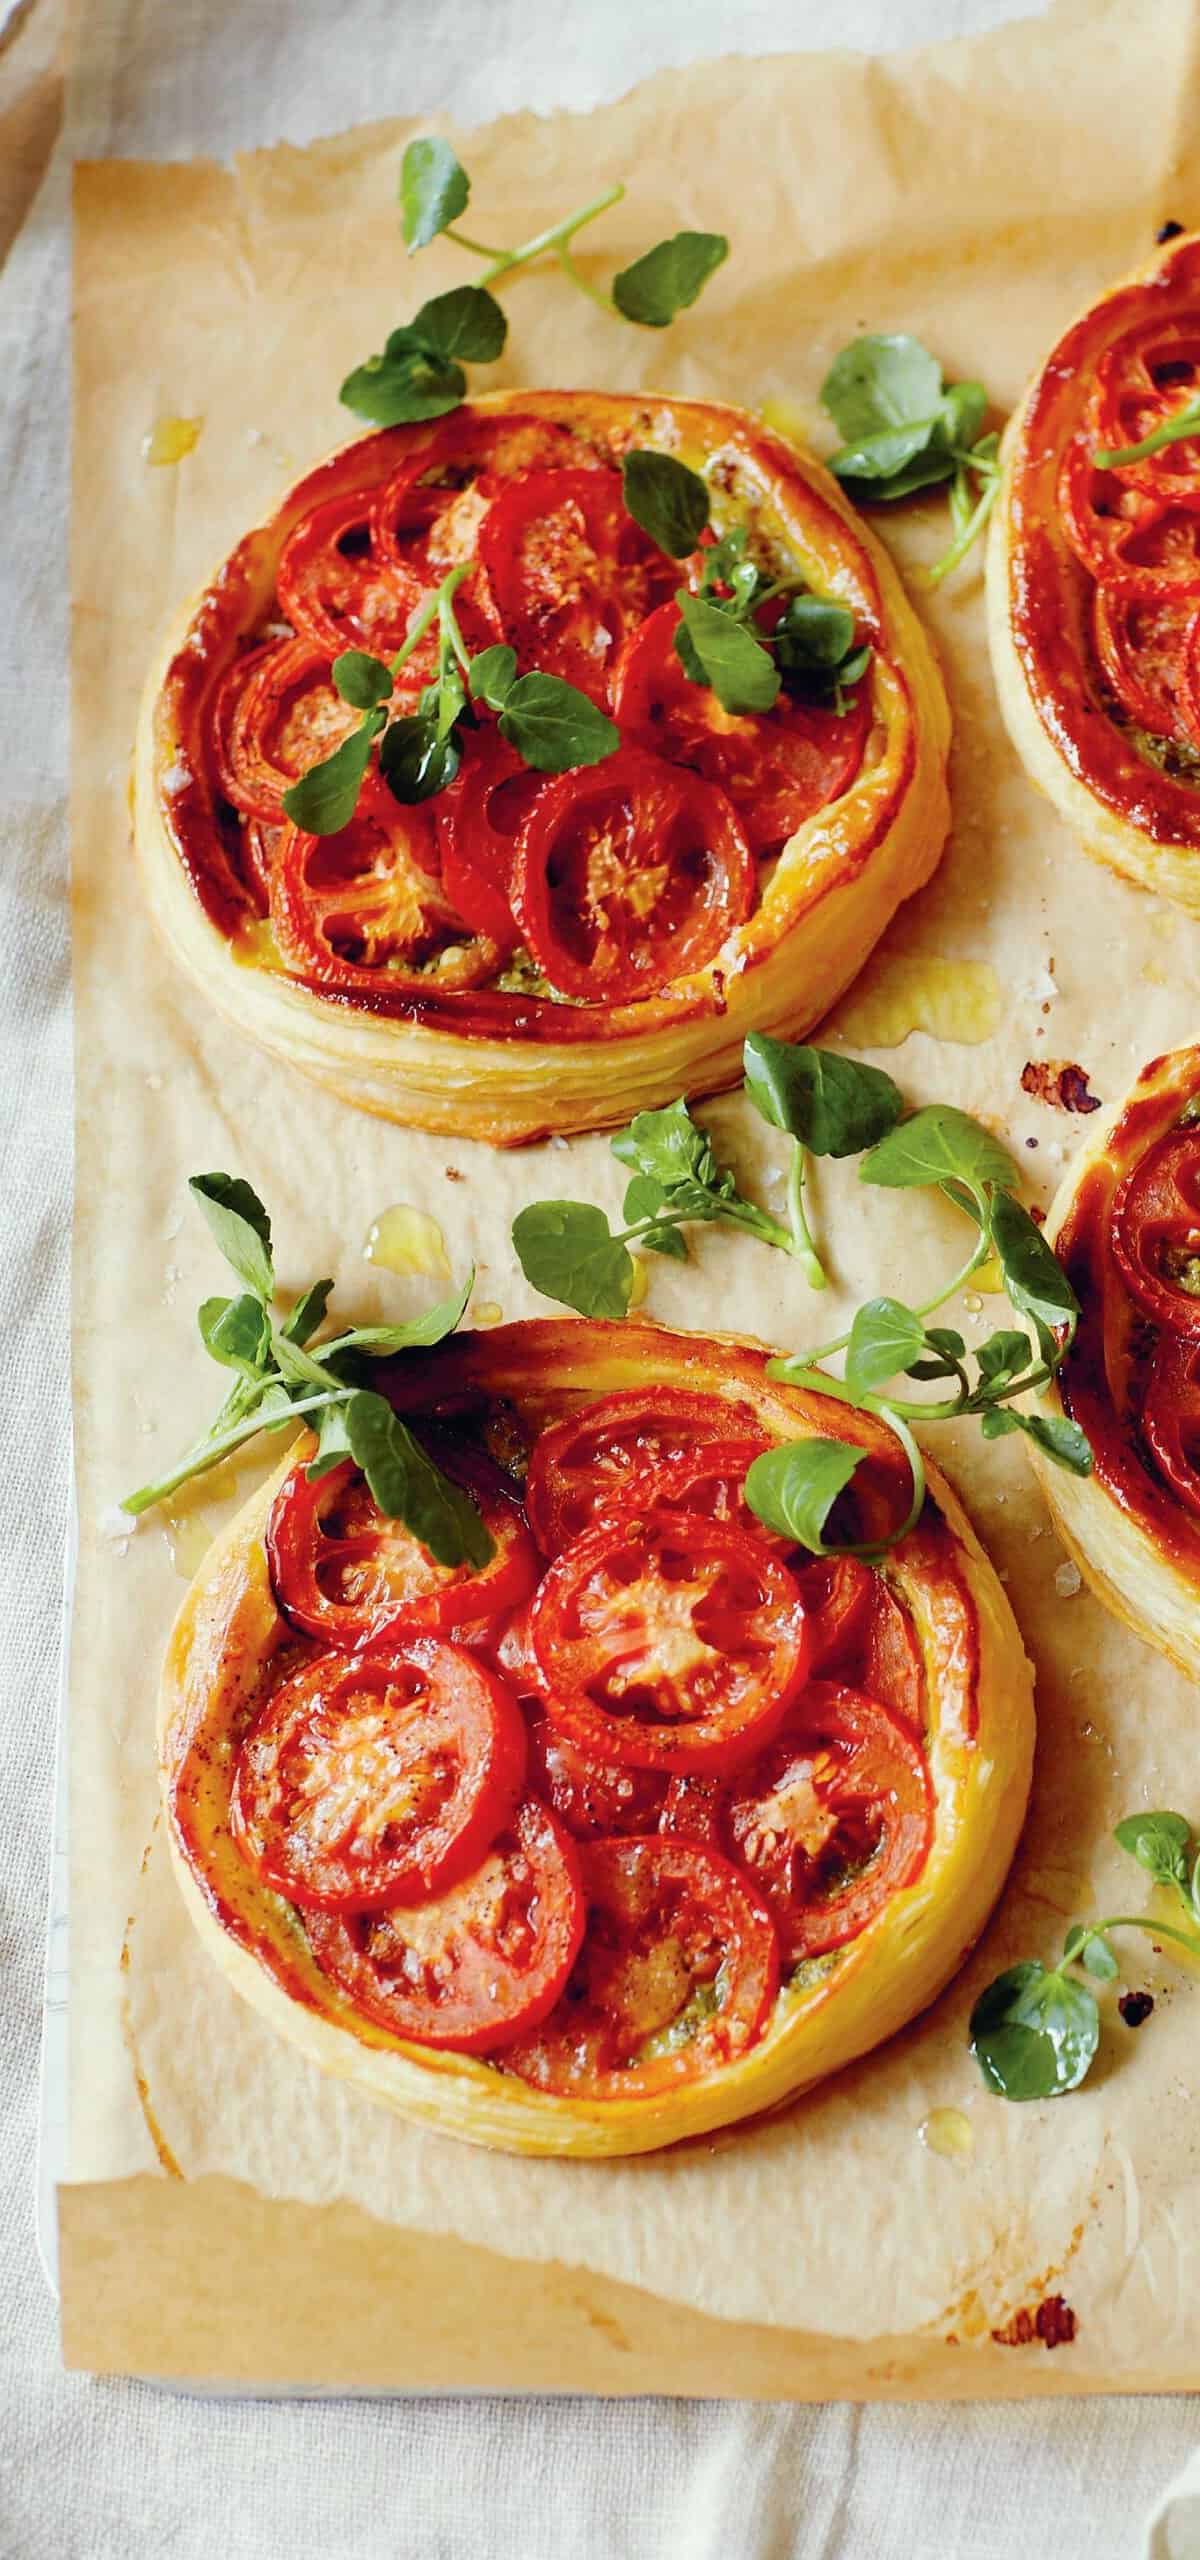  Pesto, tomatoes, cheese and a little bit of magic – your taste buds won't know what hit them